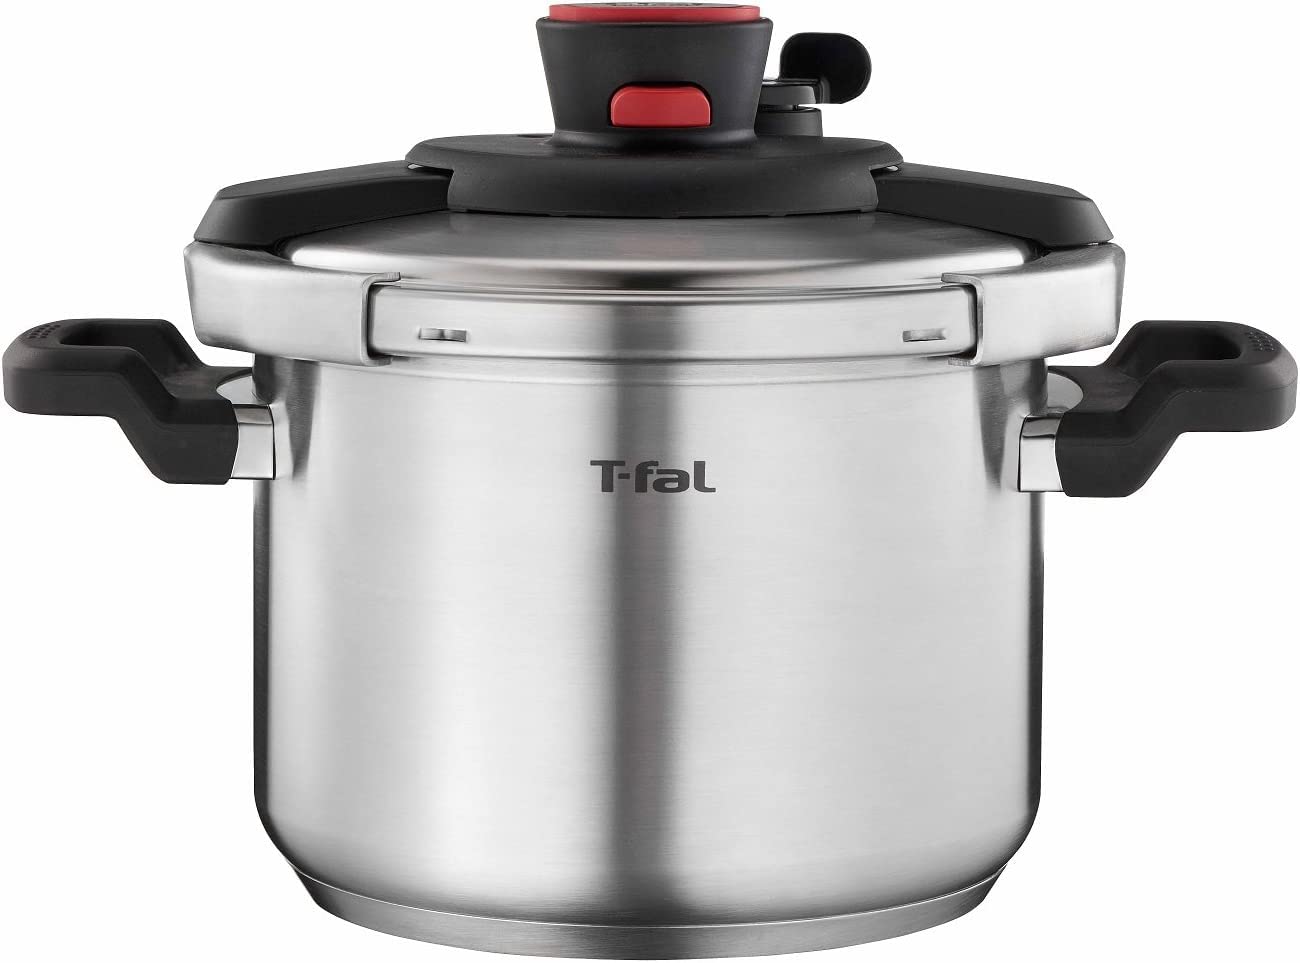 T-fal Pressure Cooker, Pressure Canner with Pressure Control